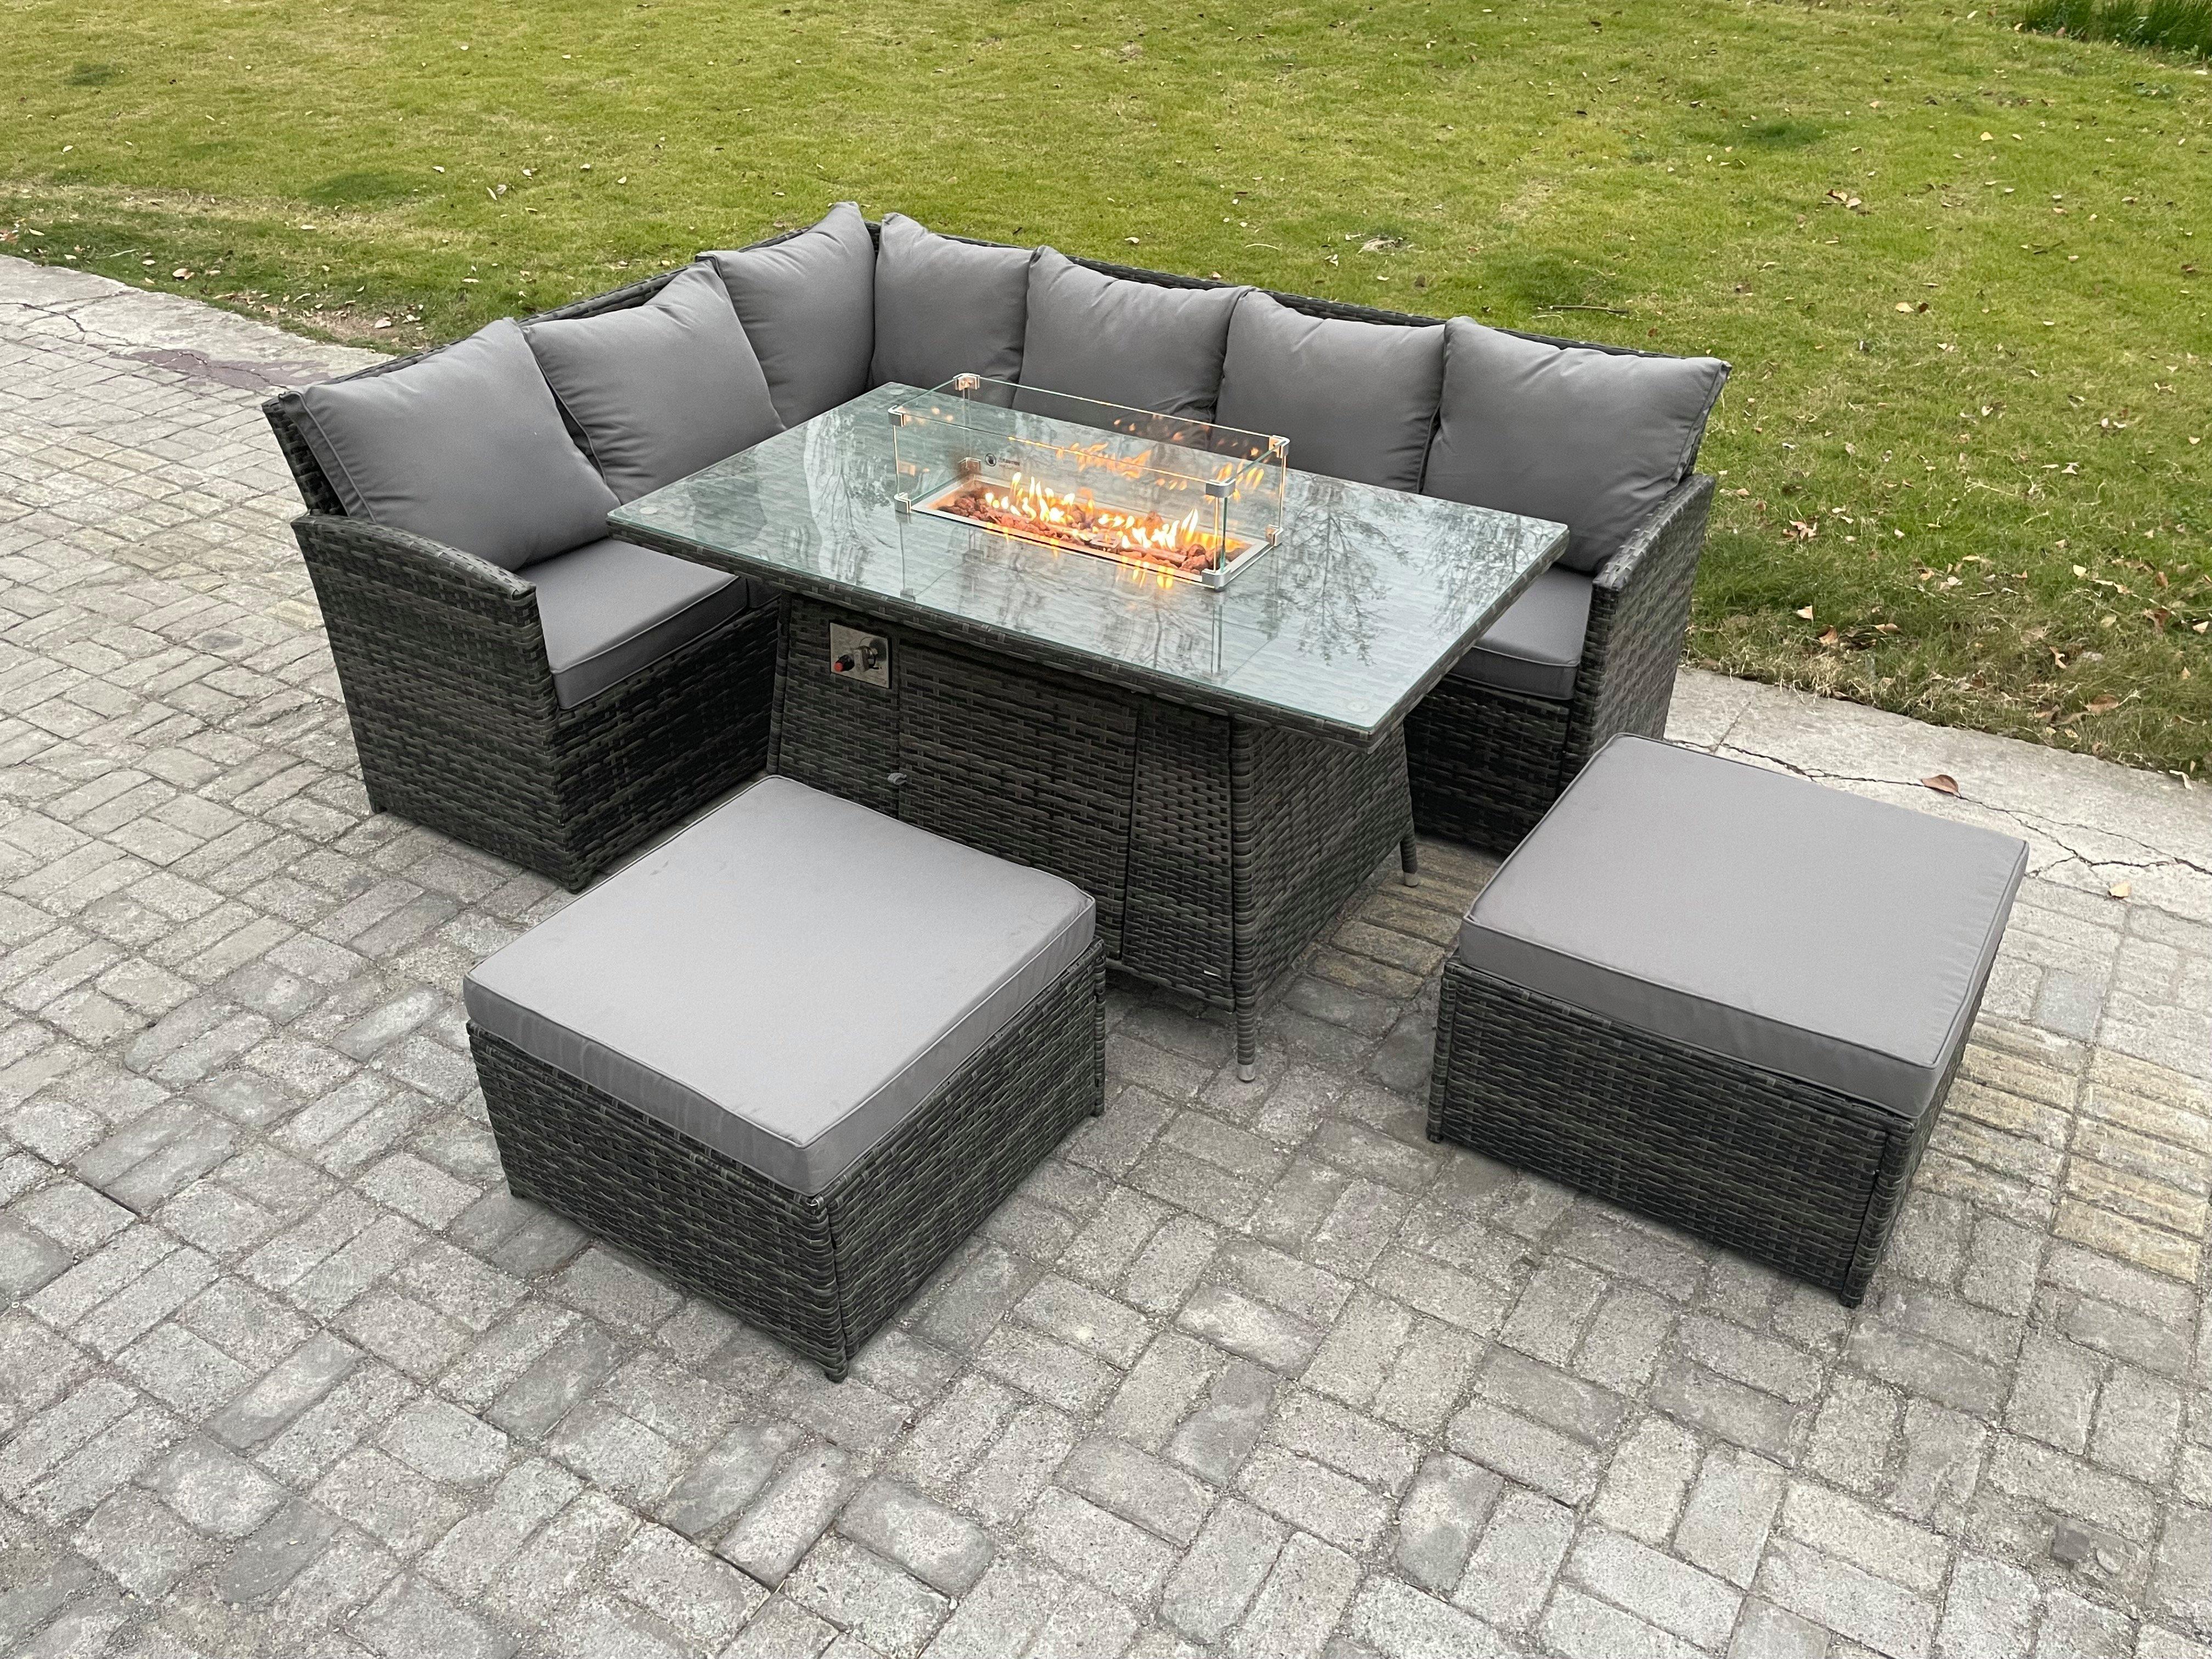 8 Seater Rattan Garden Furniture High Back Corner Sofa Gas Fire Pit Dining Table Sets Gas Heater wit